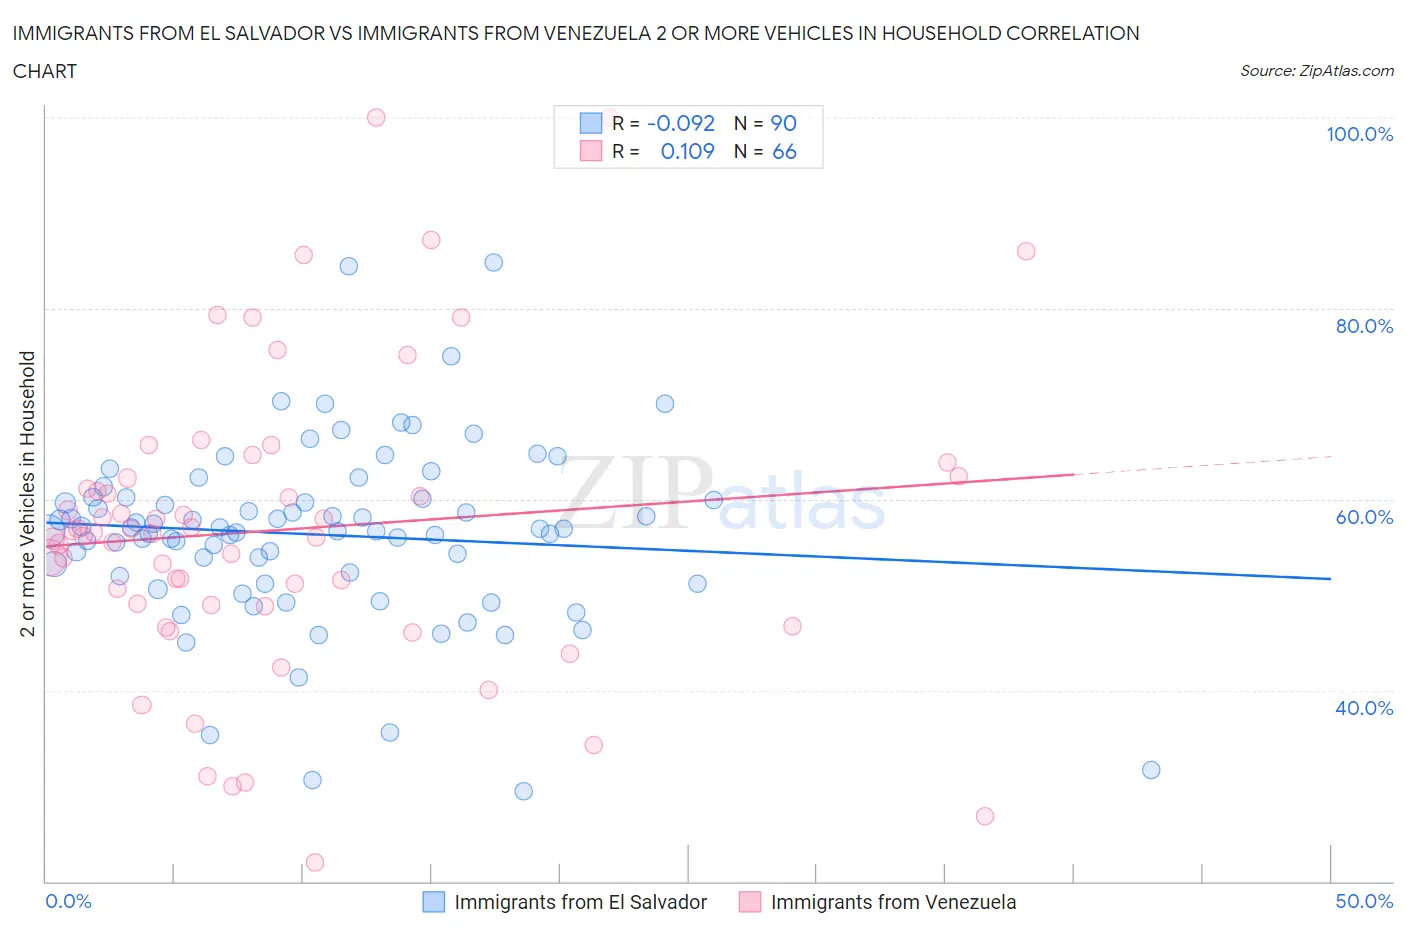 Immigrants from El Salvador vs Immigrants from Venezuela 2 or more Vehicles in Household